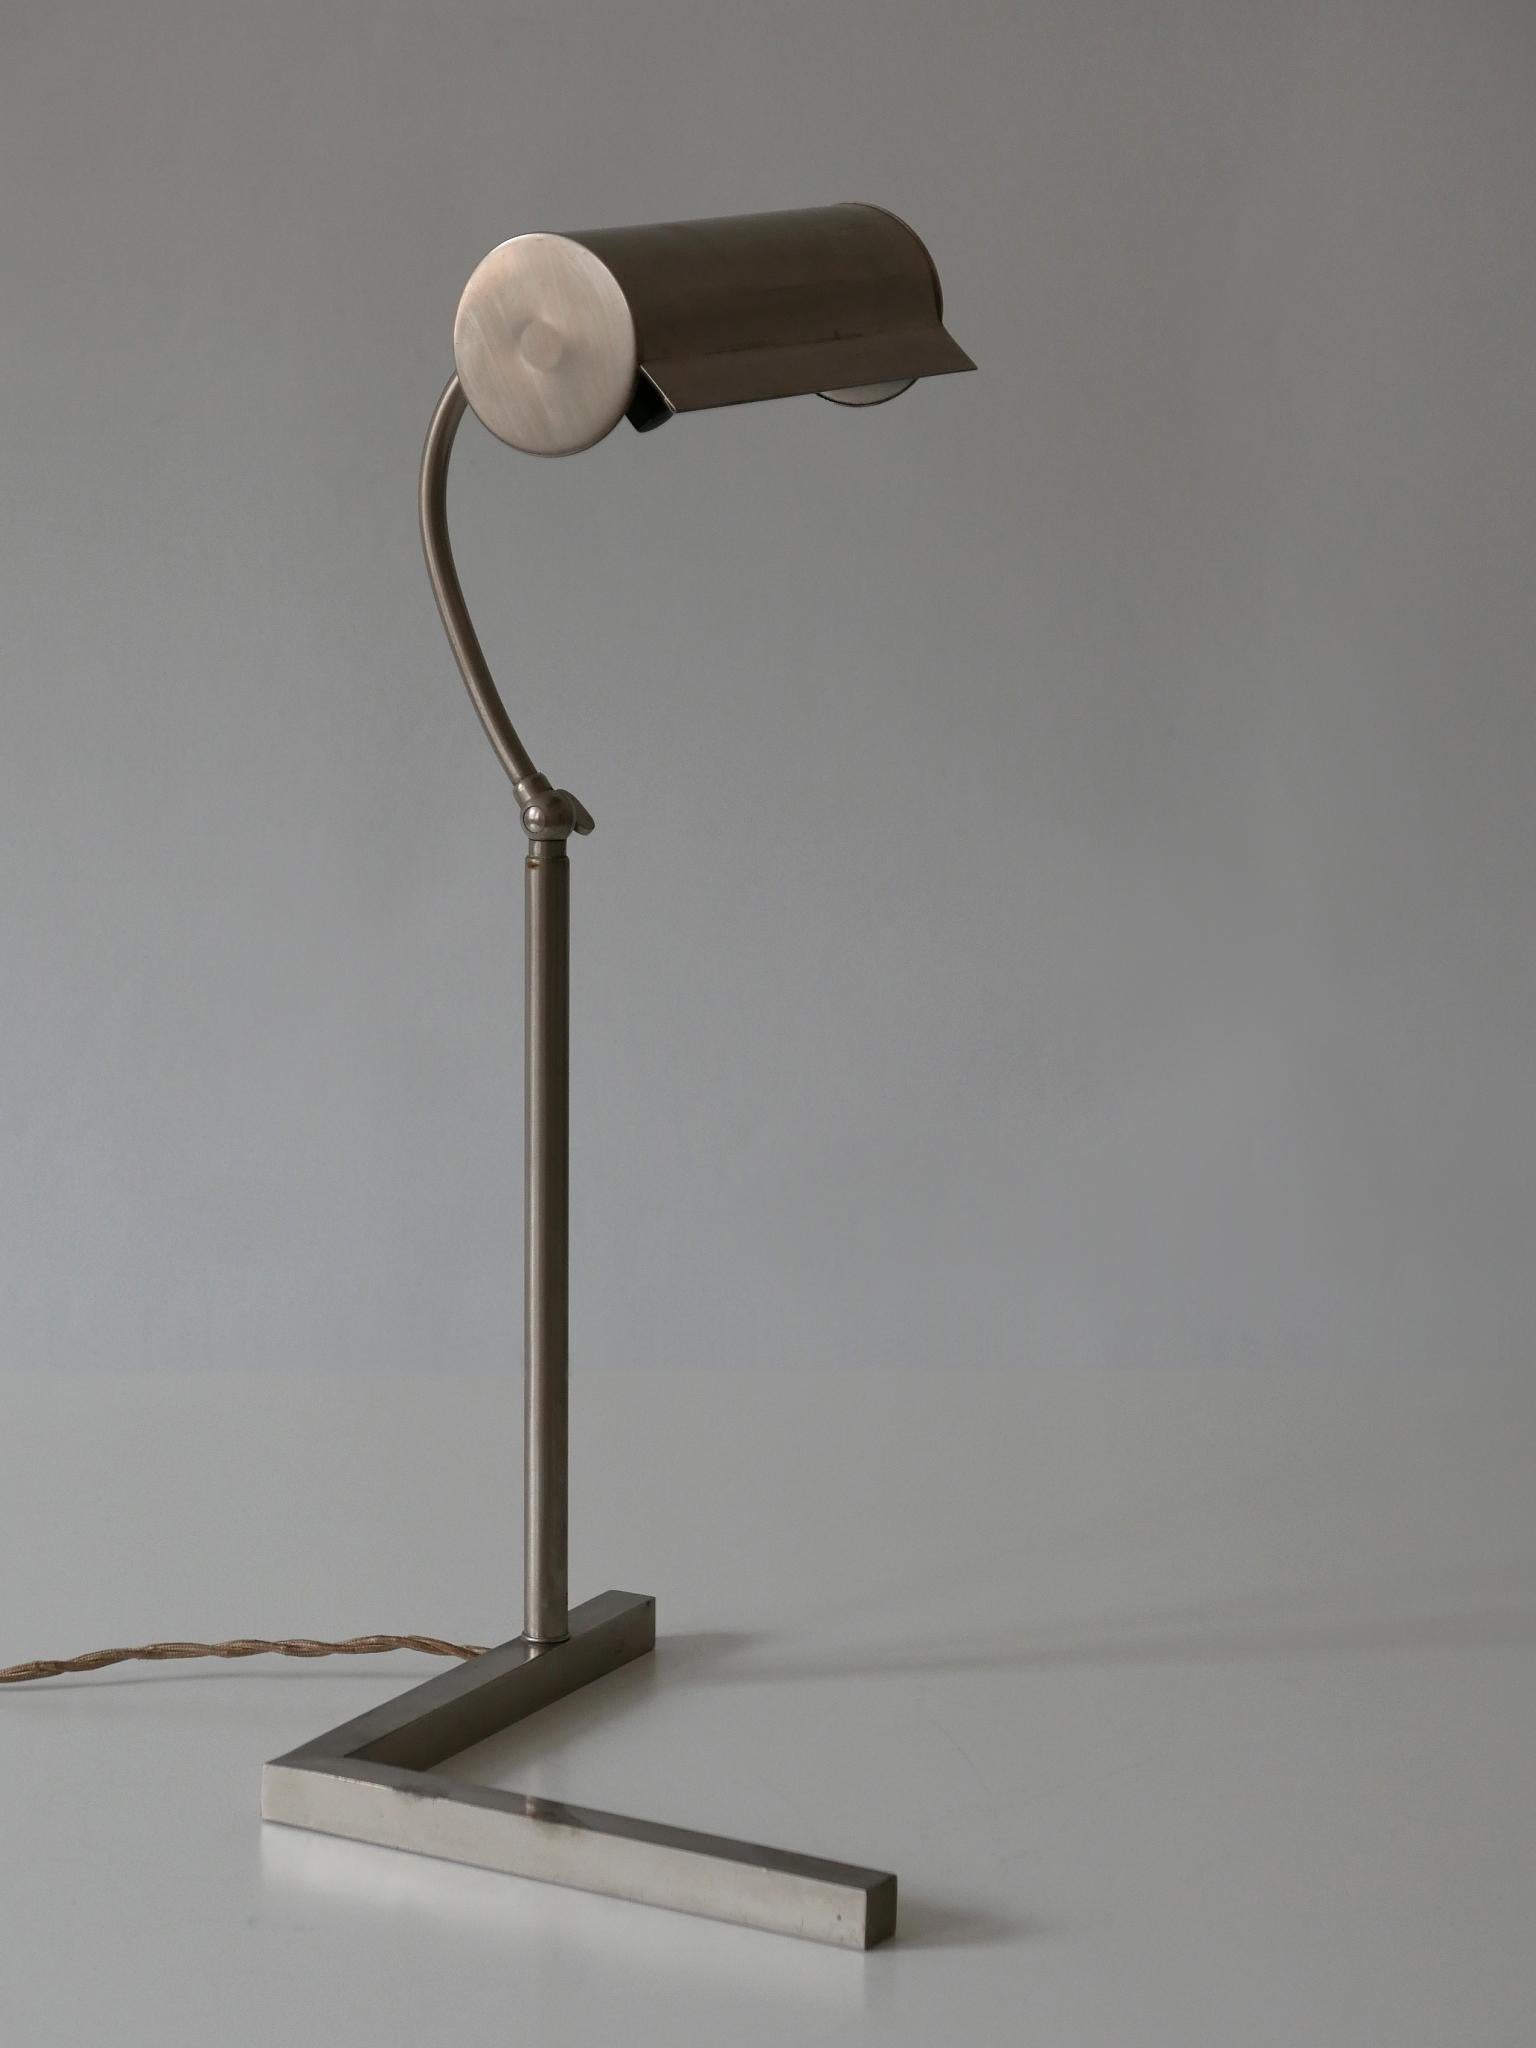 Early 20th Century Rare Bauhaus Table Lamp by Jacobus Johannes Pieter Oud for W. H. Gispen 1920s